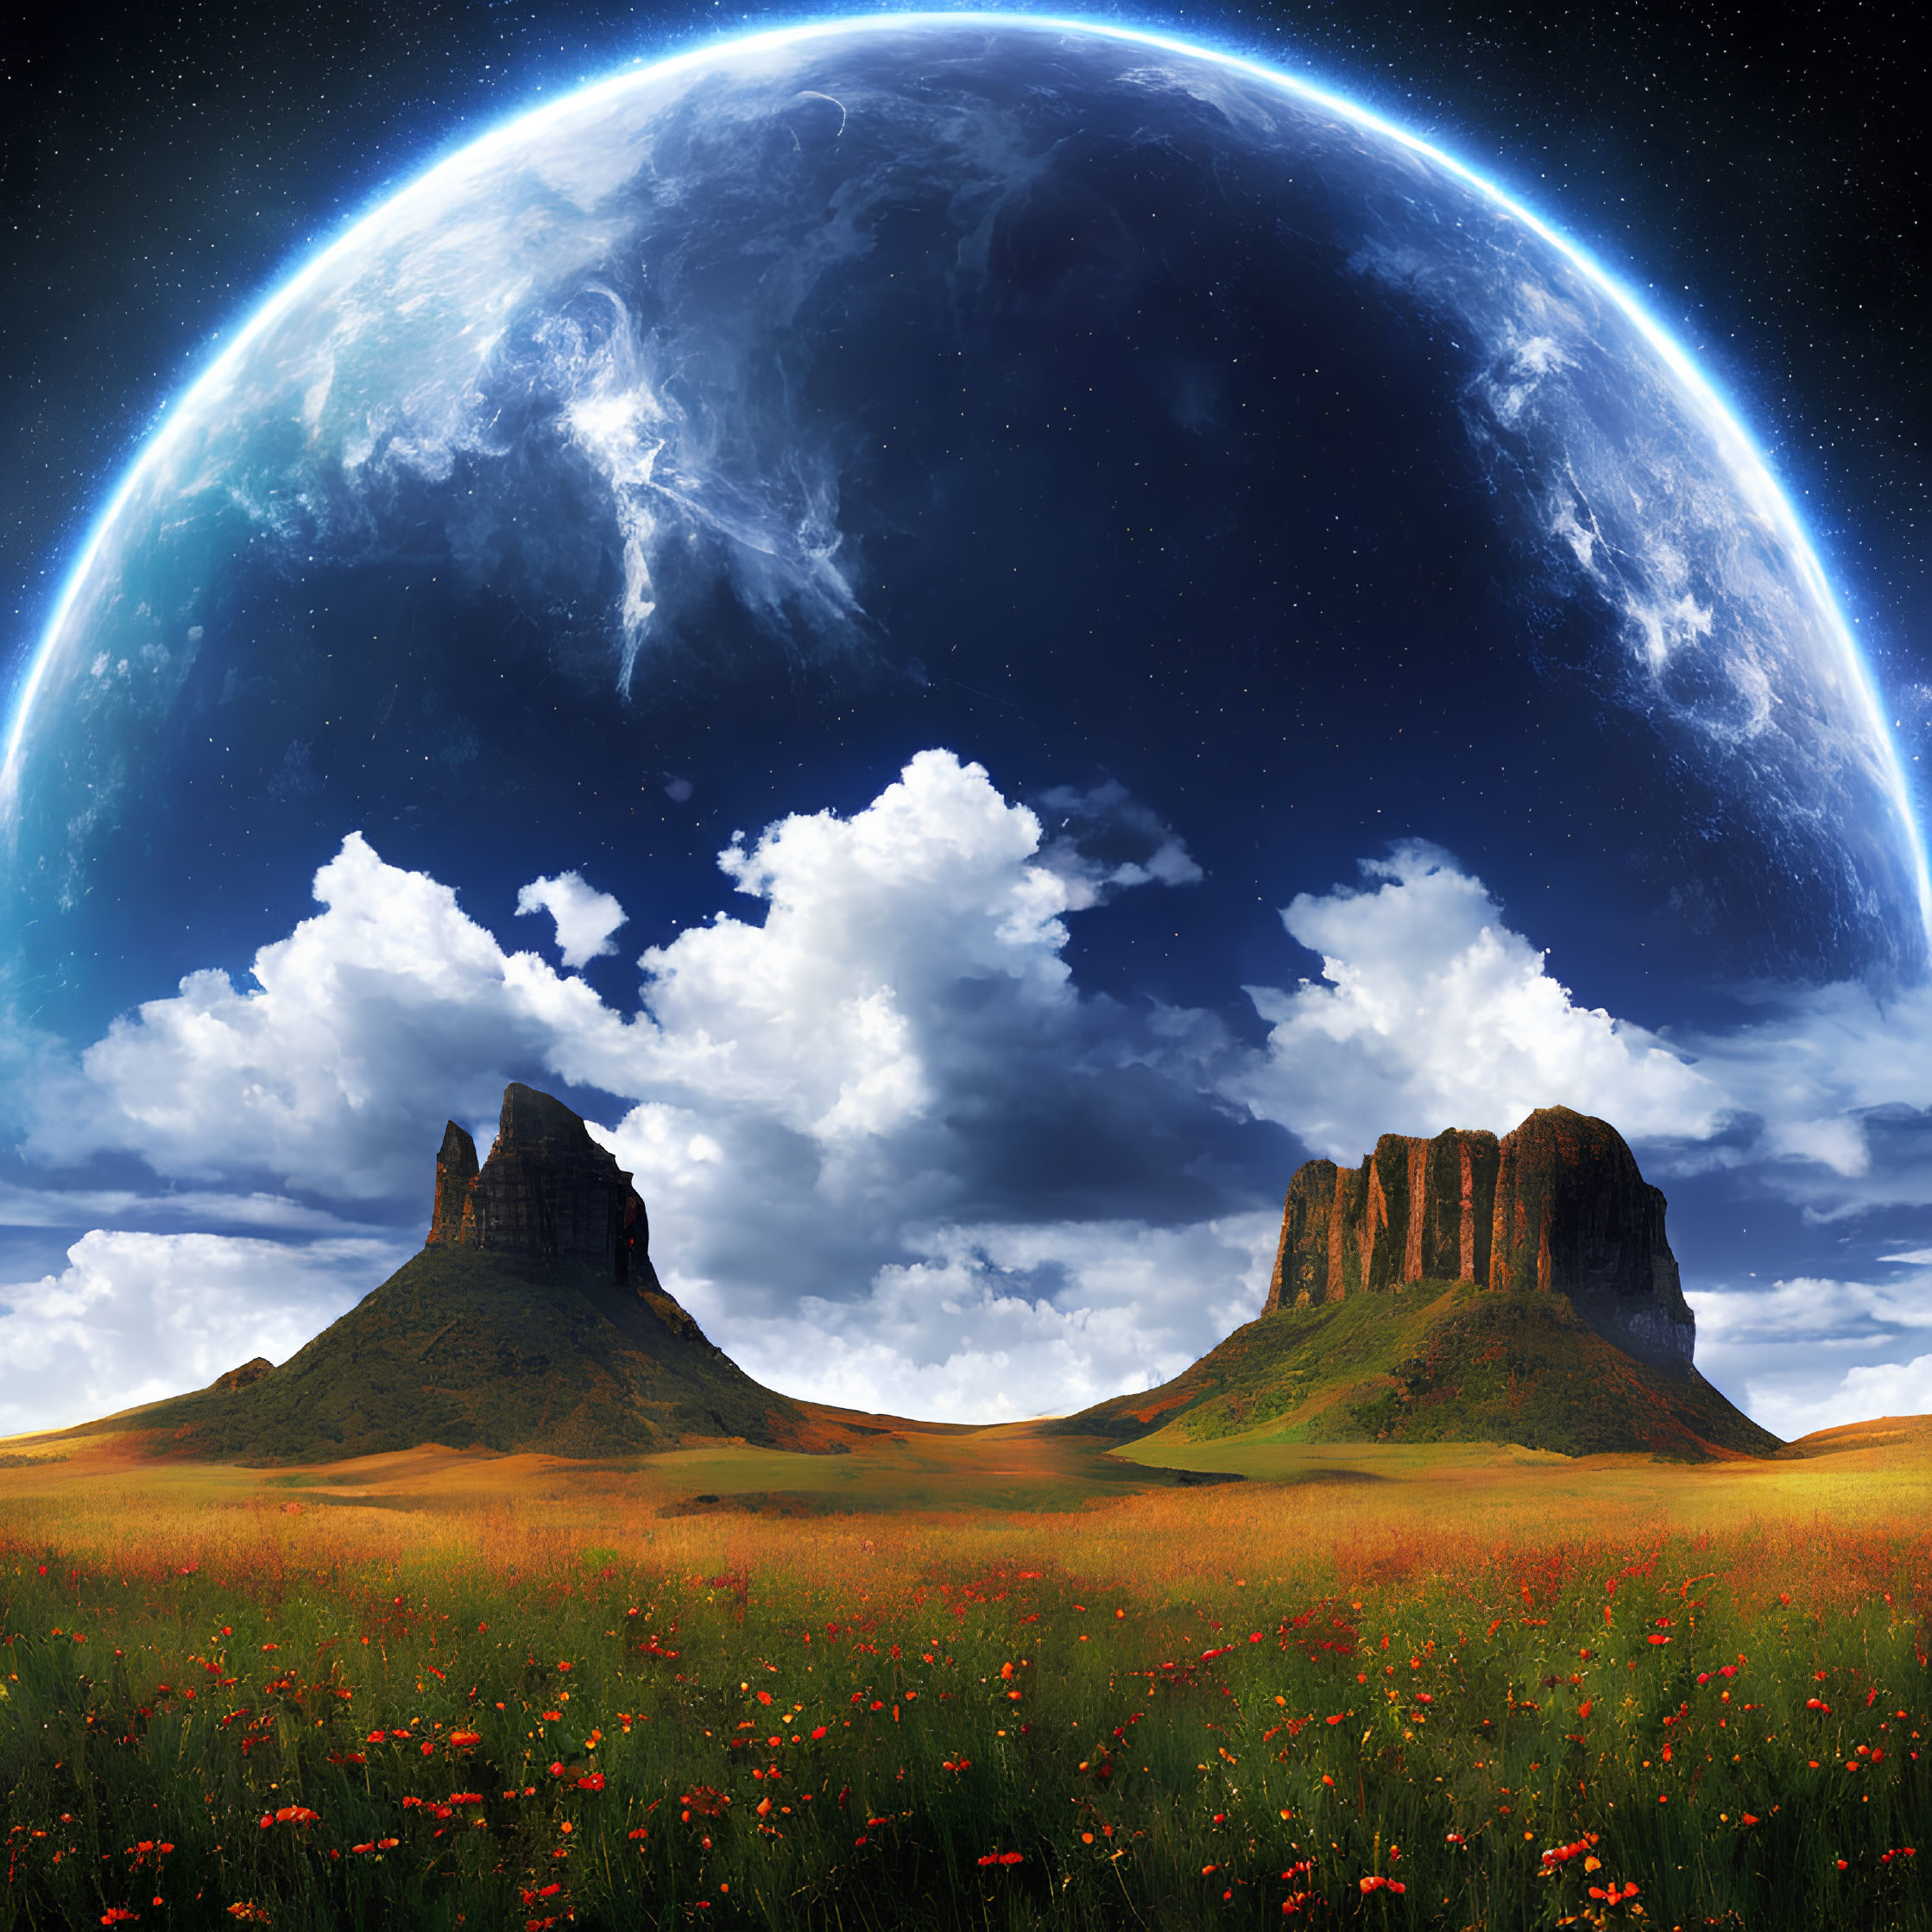 Red flowers field under cloudy sky with giant planet and towering rocks